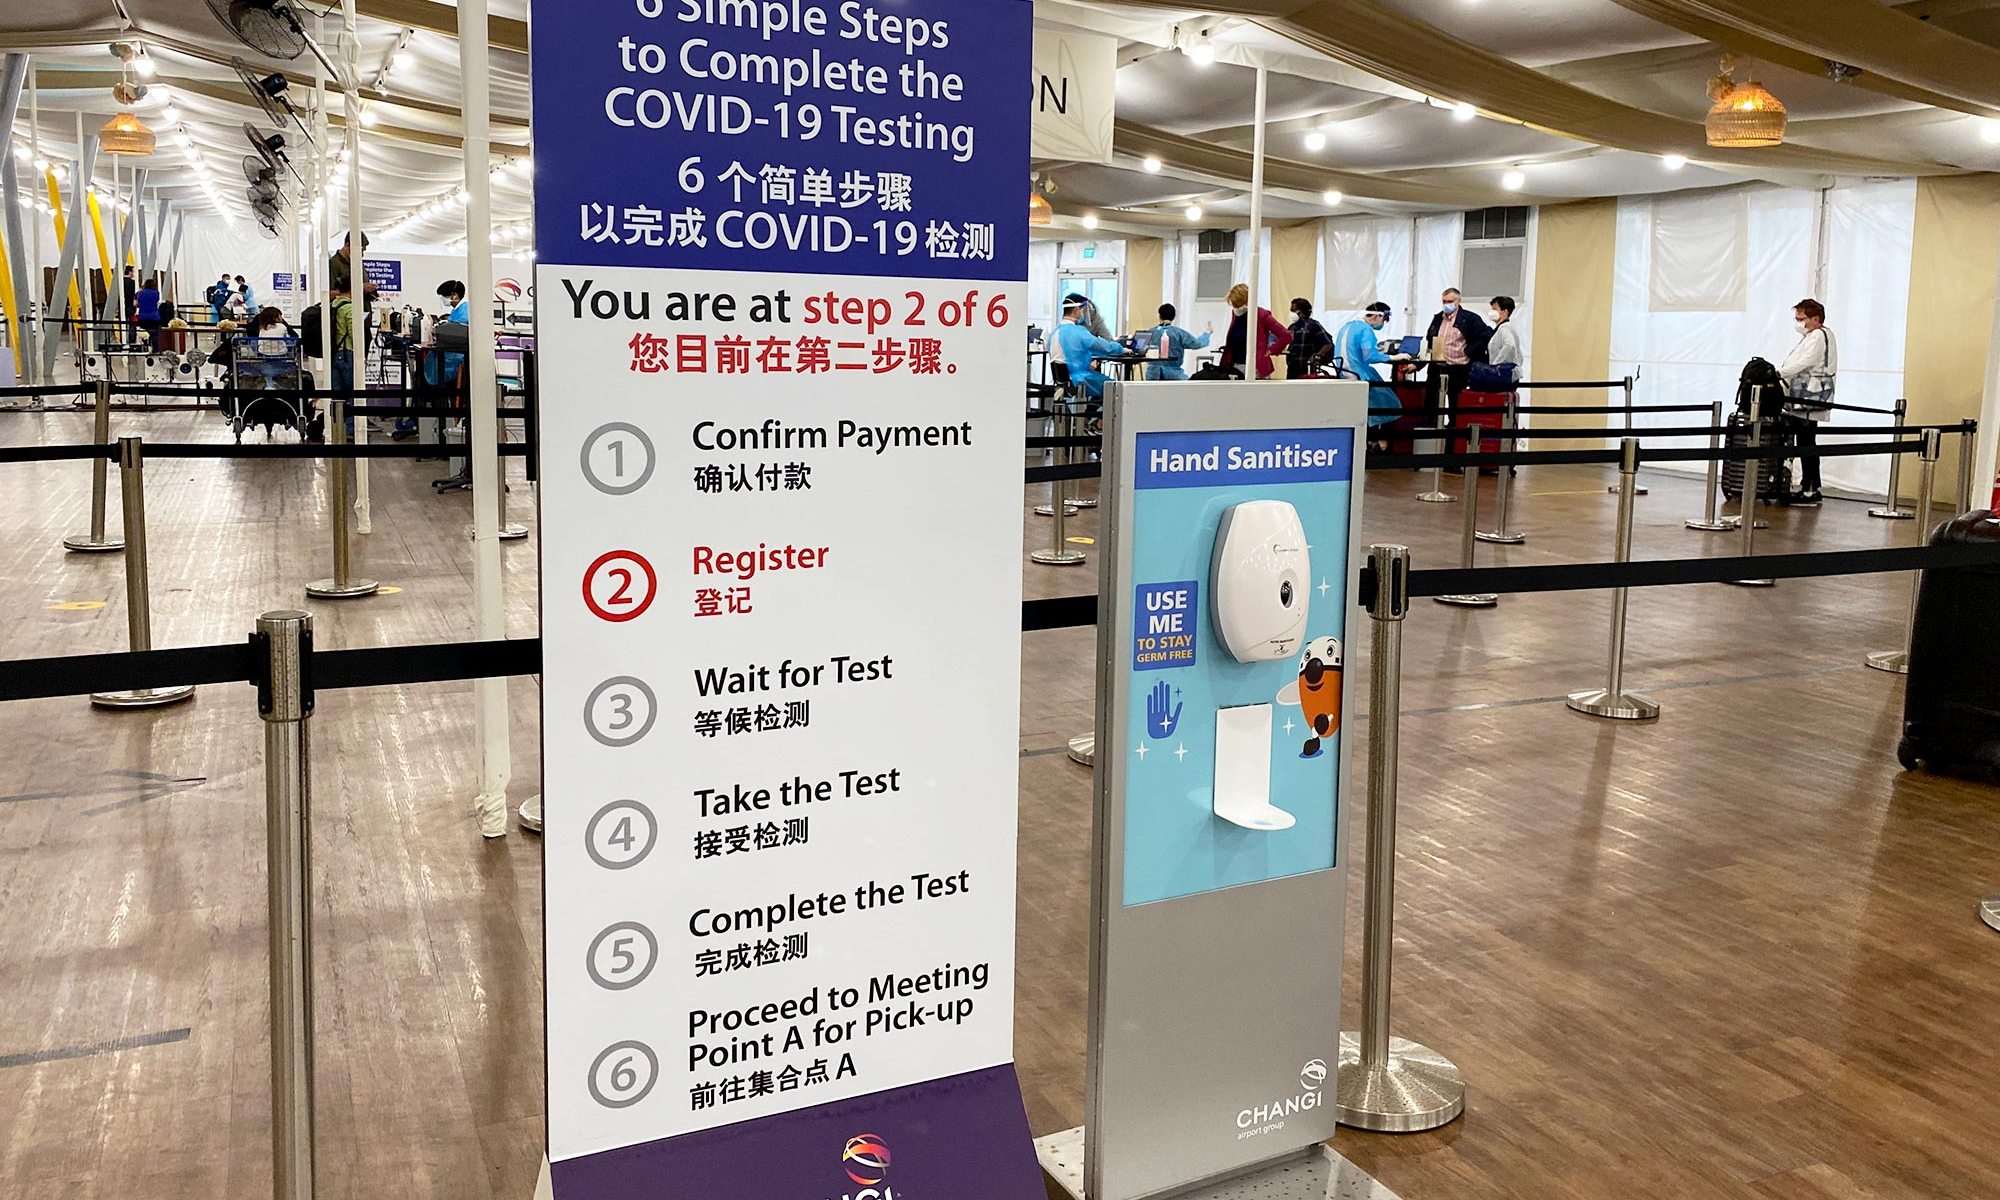 Singapore Changi Airport Terminal Access Rules - One Mile at a Time